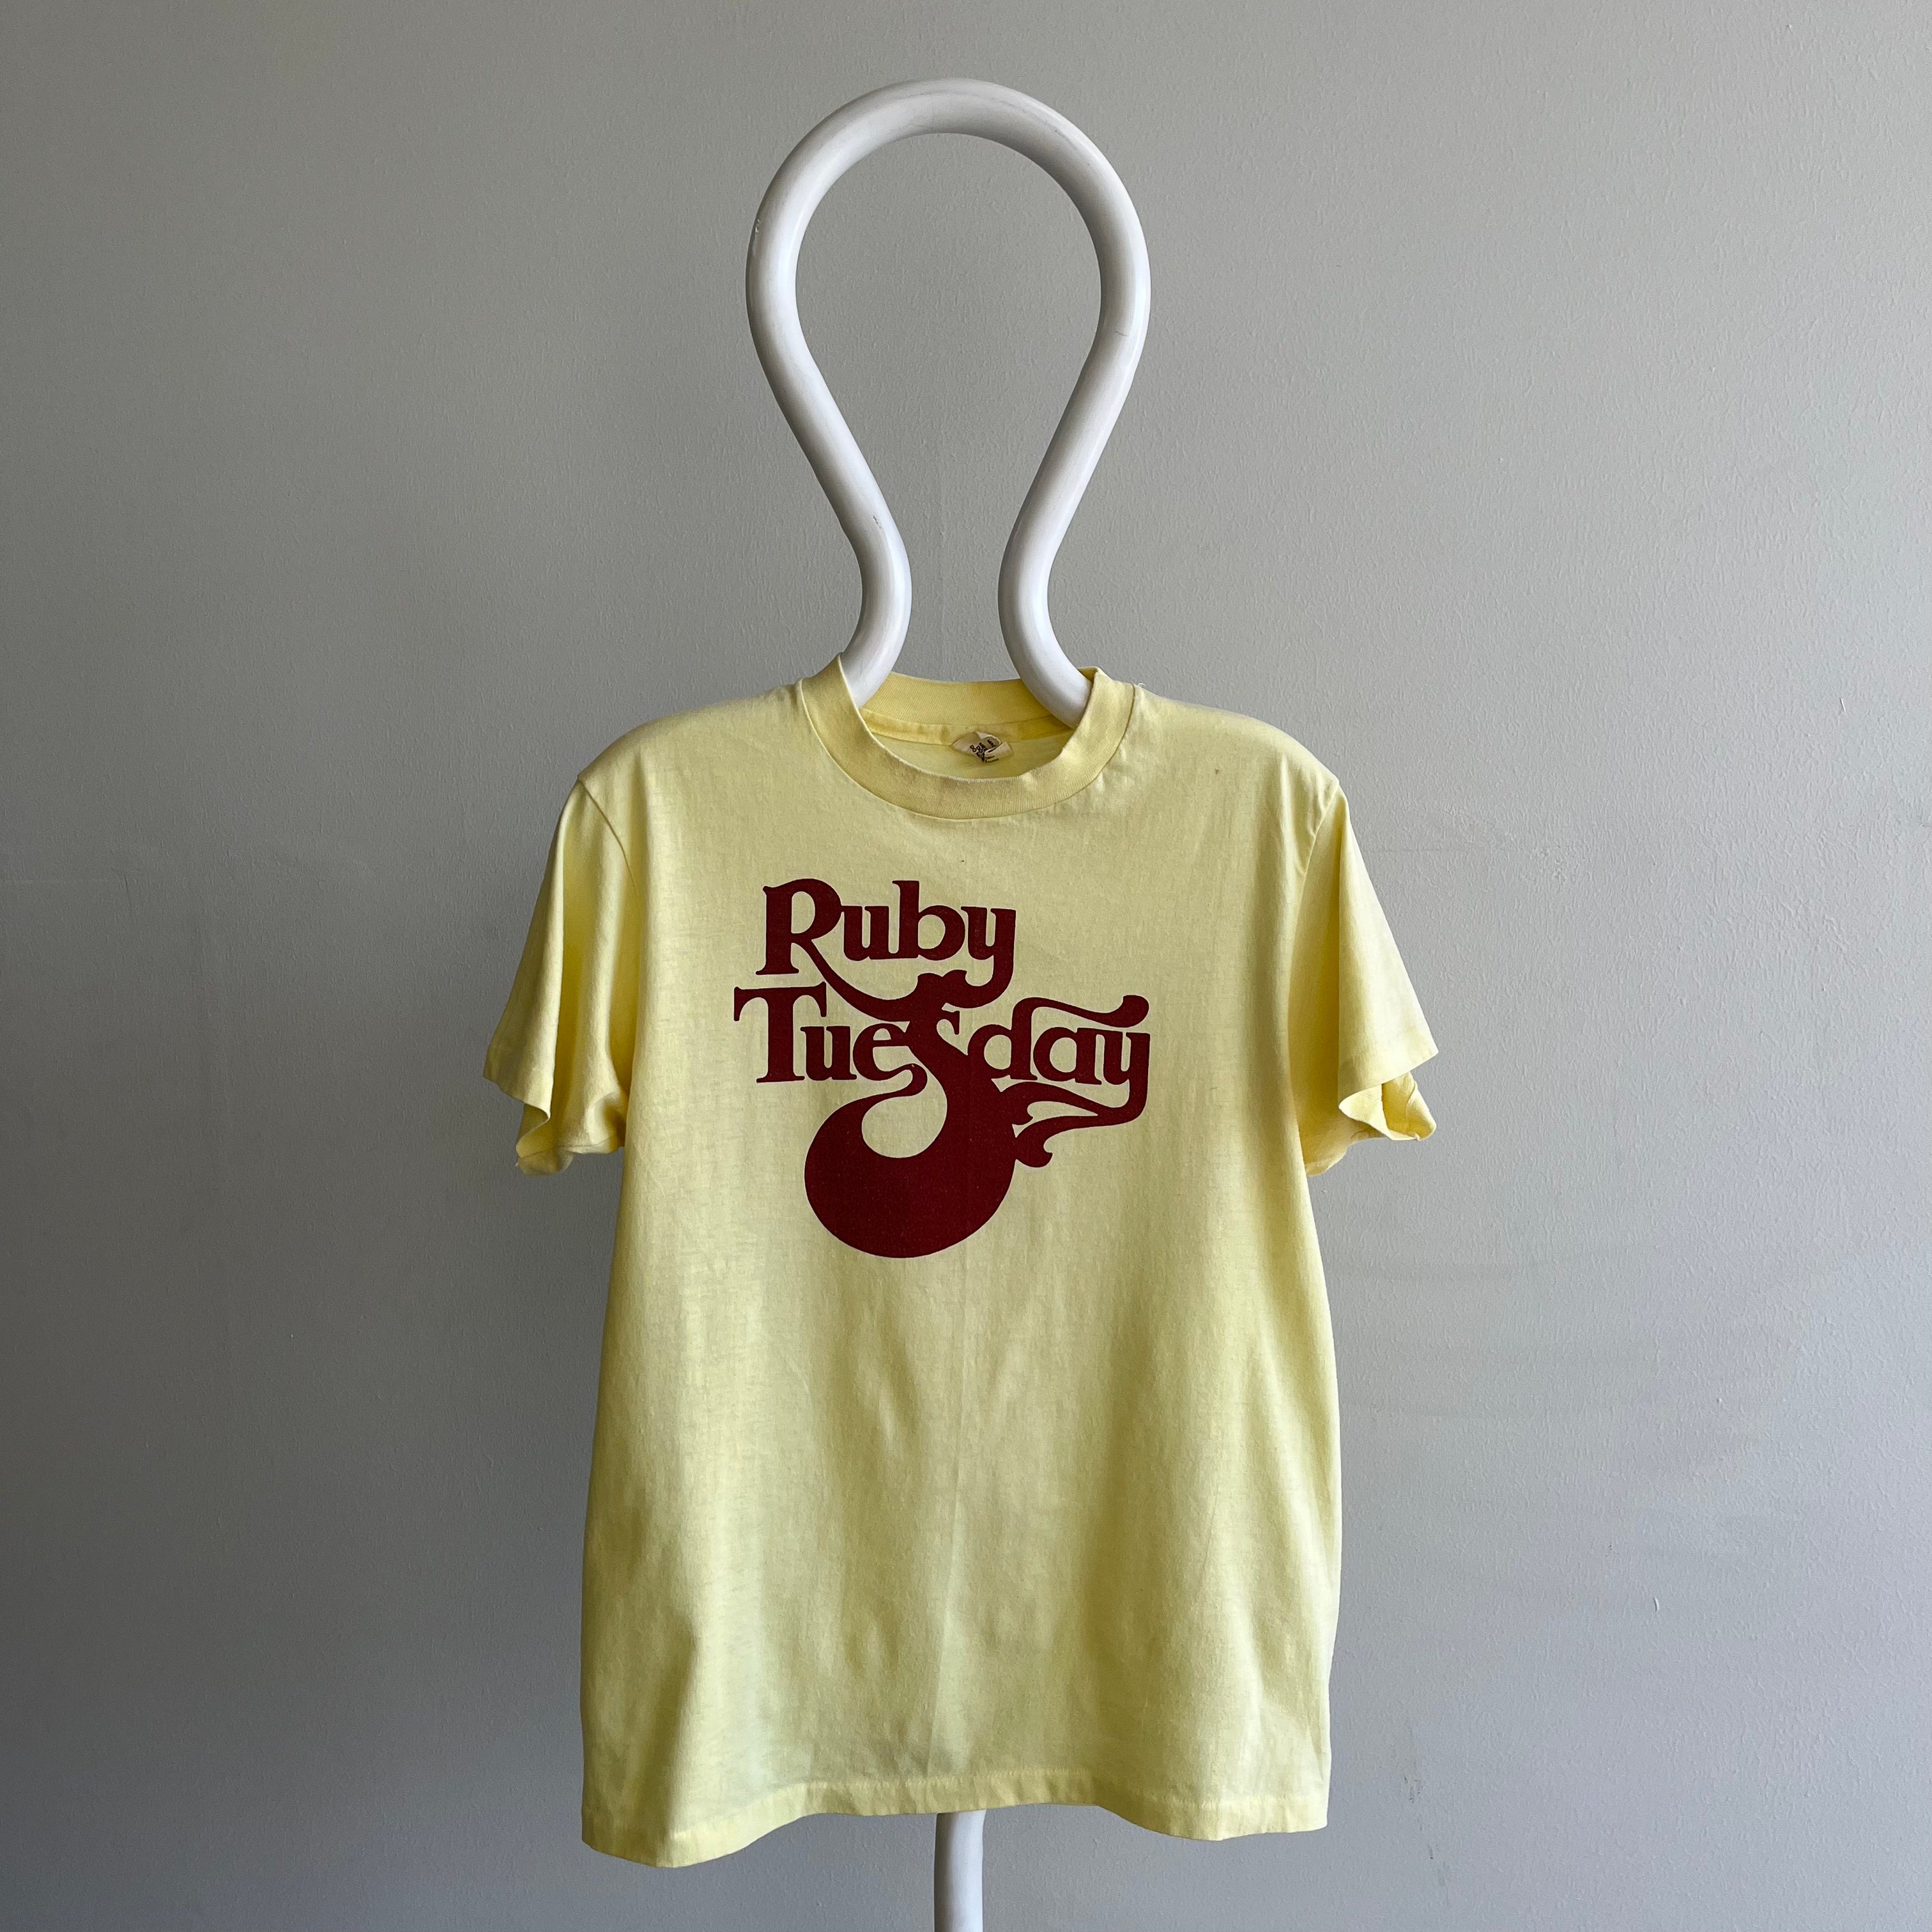 1970s Ruby Tuesdays T-Shirt (Check Out That Vintage Hanes Tag!)